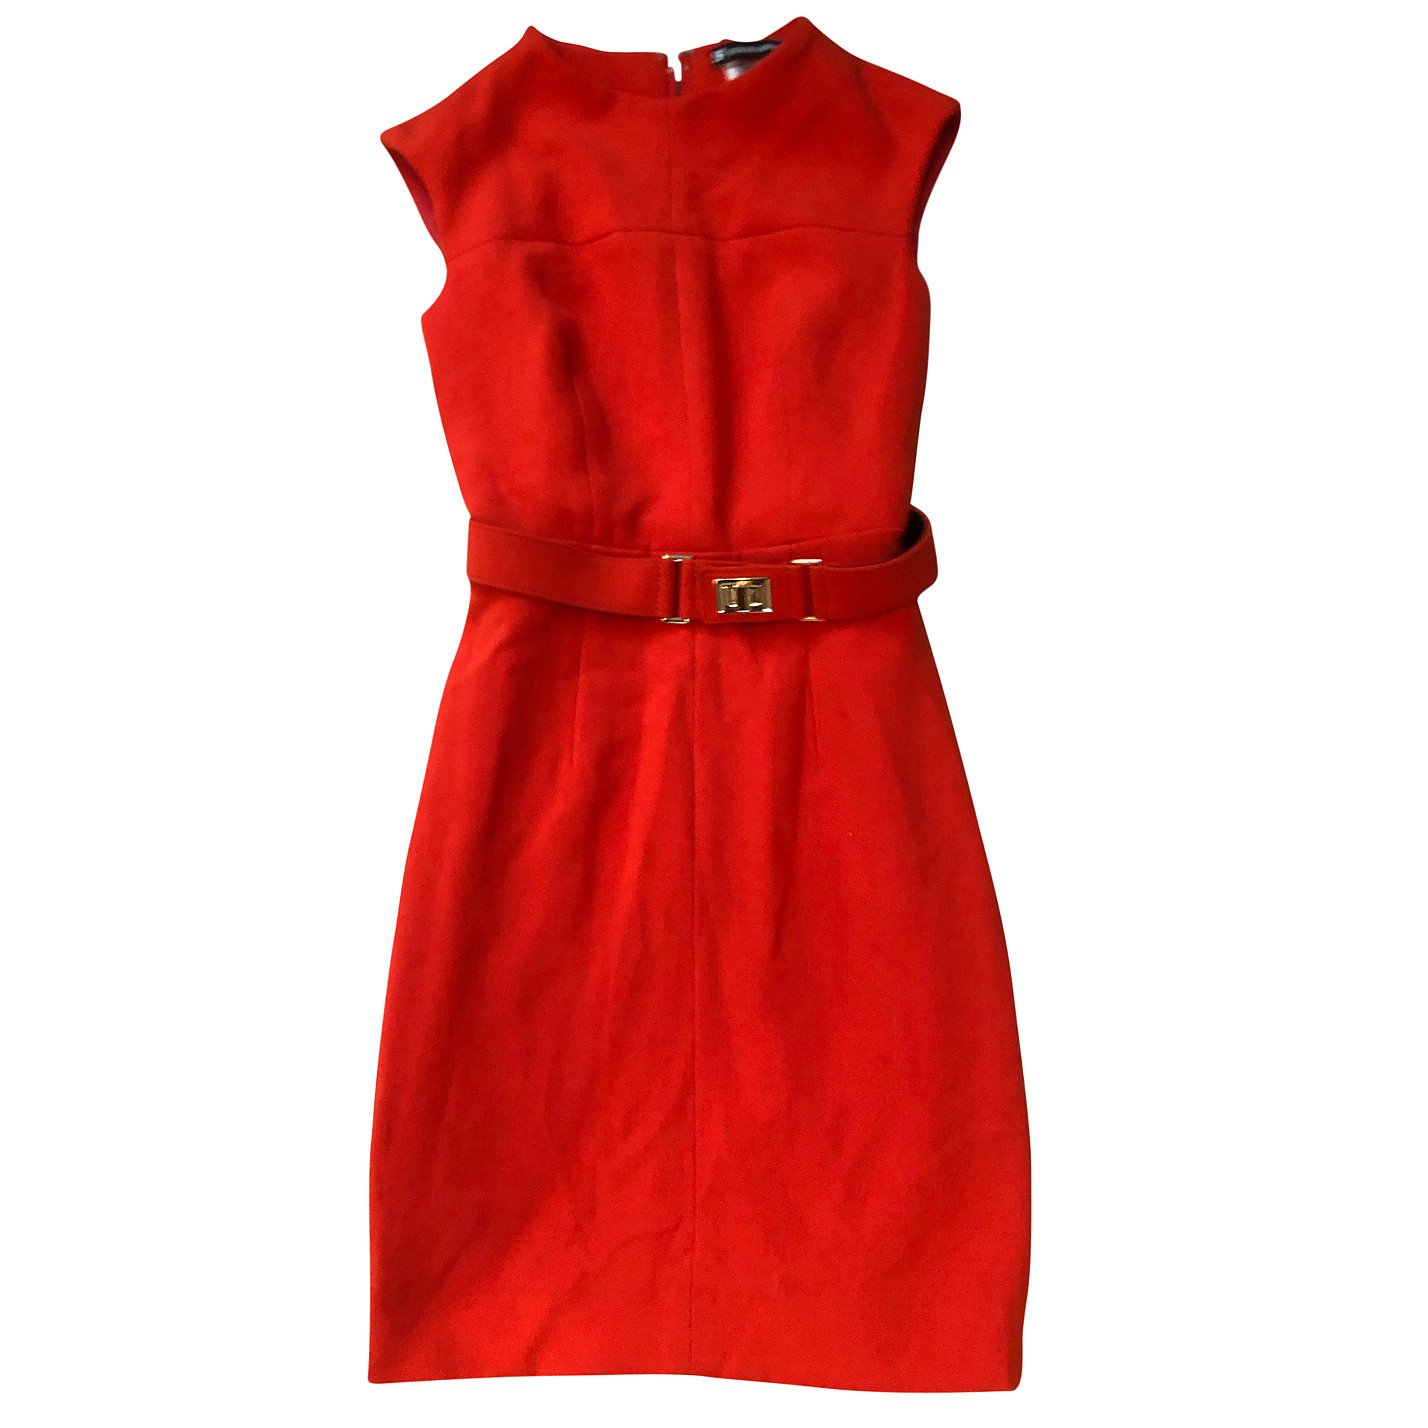 Milly Daphne Belted Dress